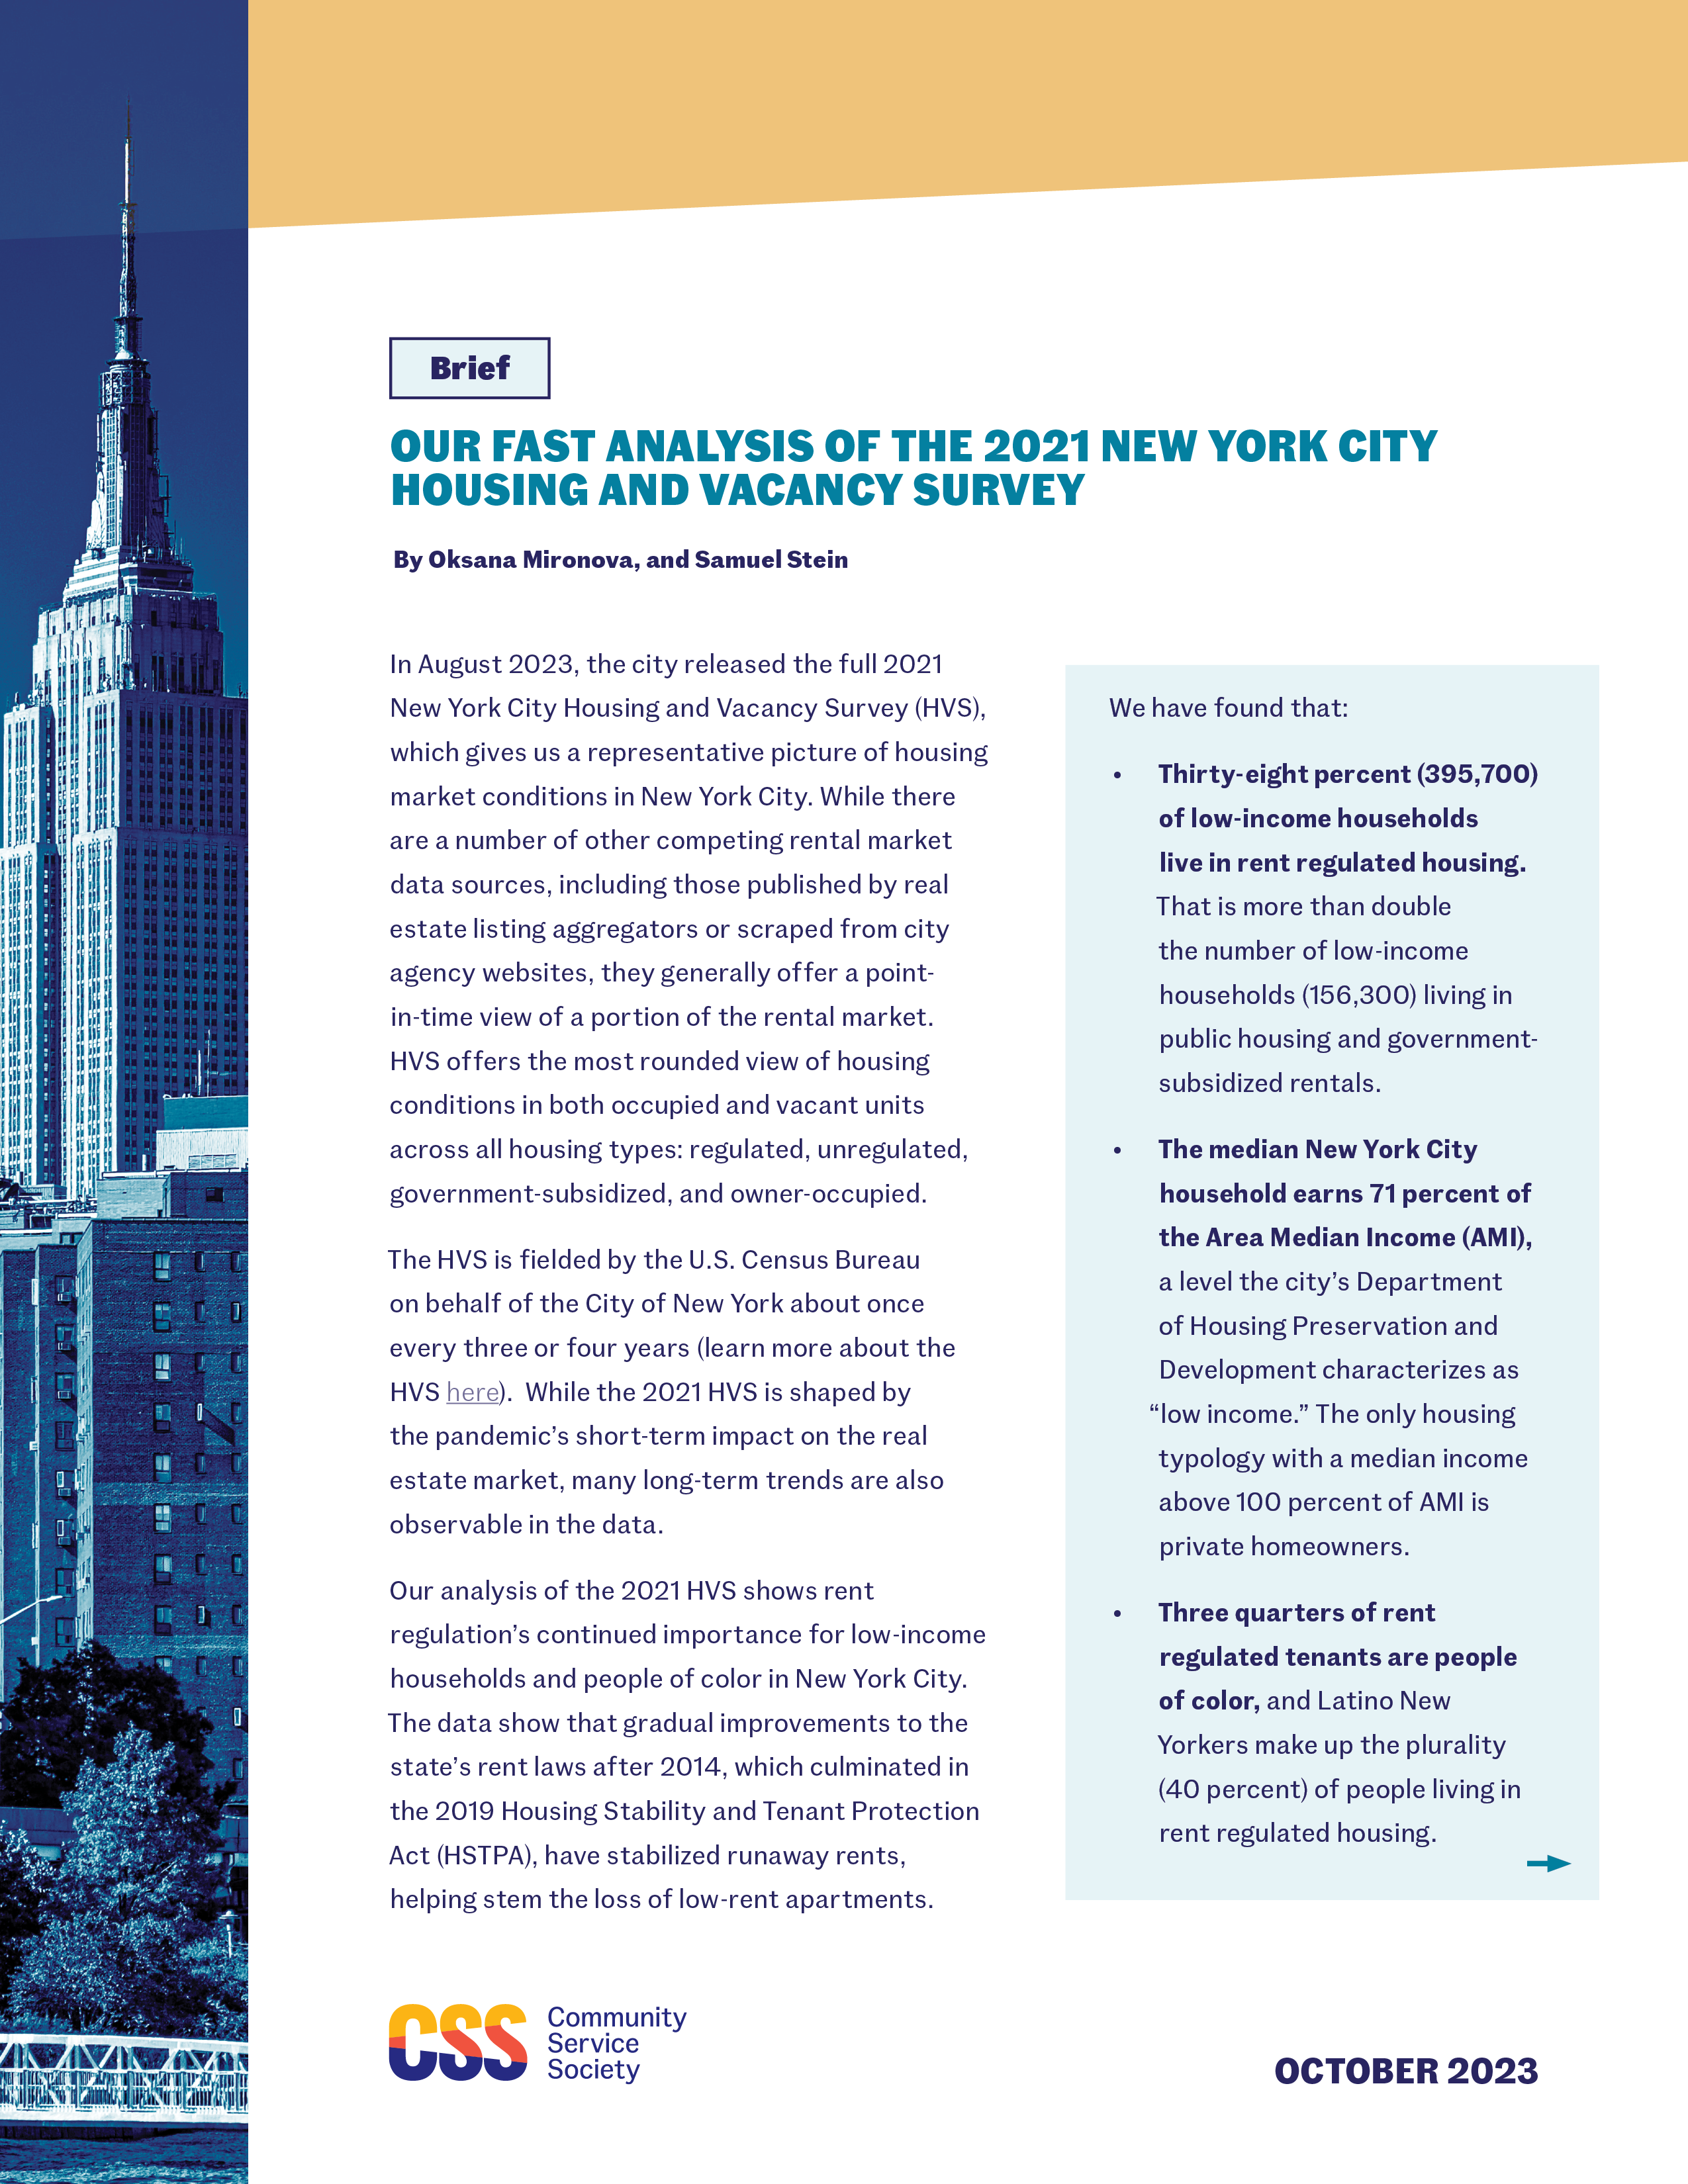 Our Fast Analysis of the 2021 New York City Housing and Vacancy Survey